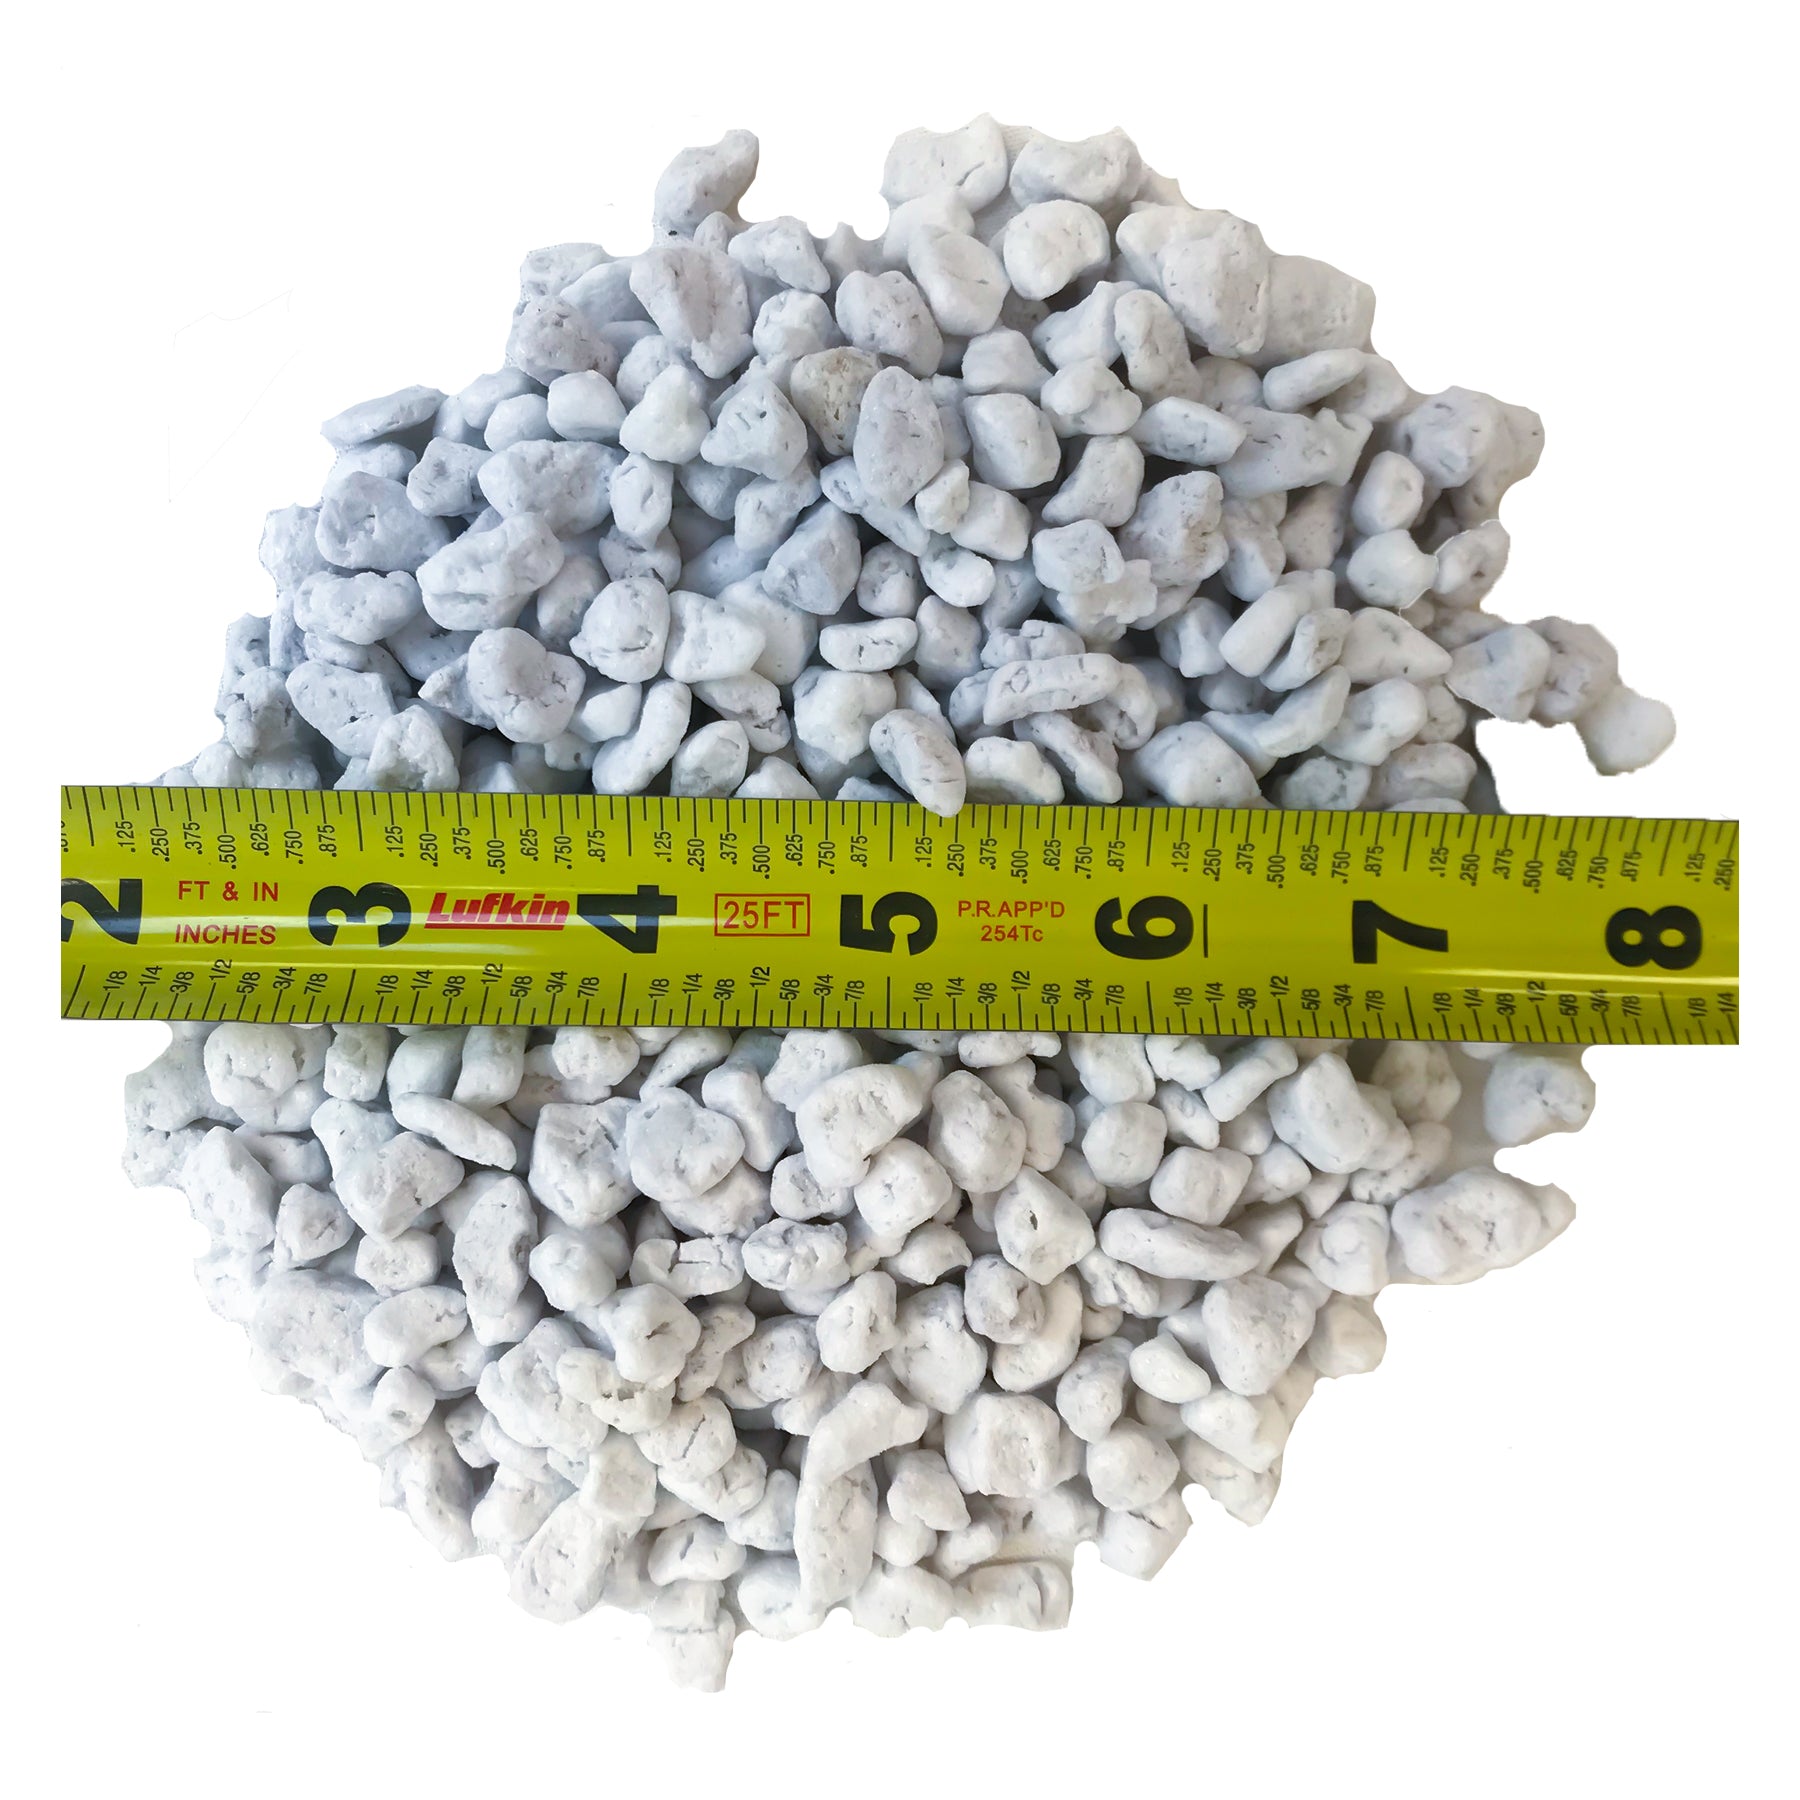 Viagrow Perlite Coarse and Chunky grade, 4 cubic ft, Pallet, 25 Bags